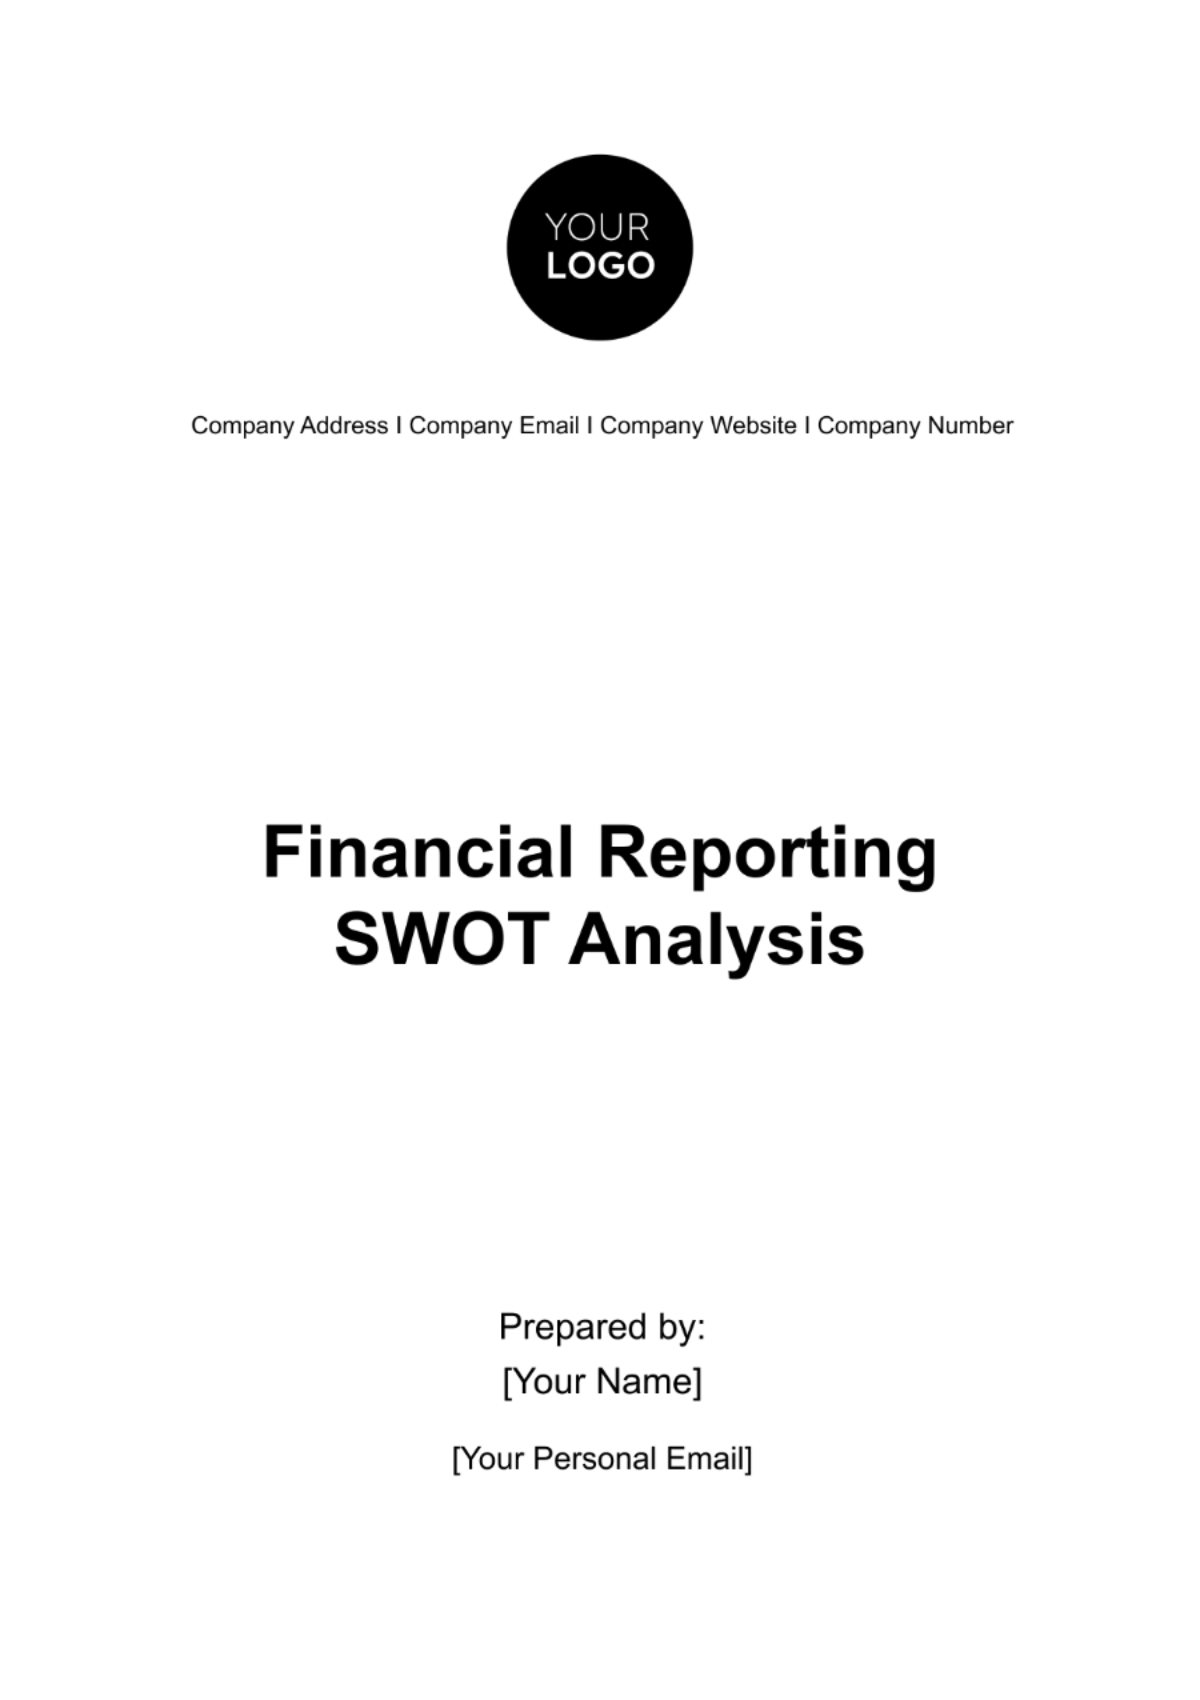 Financial Reporting SWOT Analysis Template